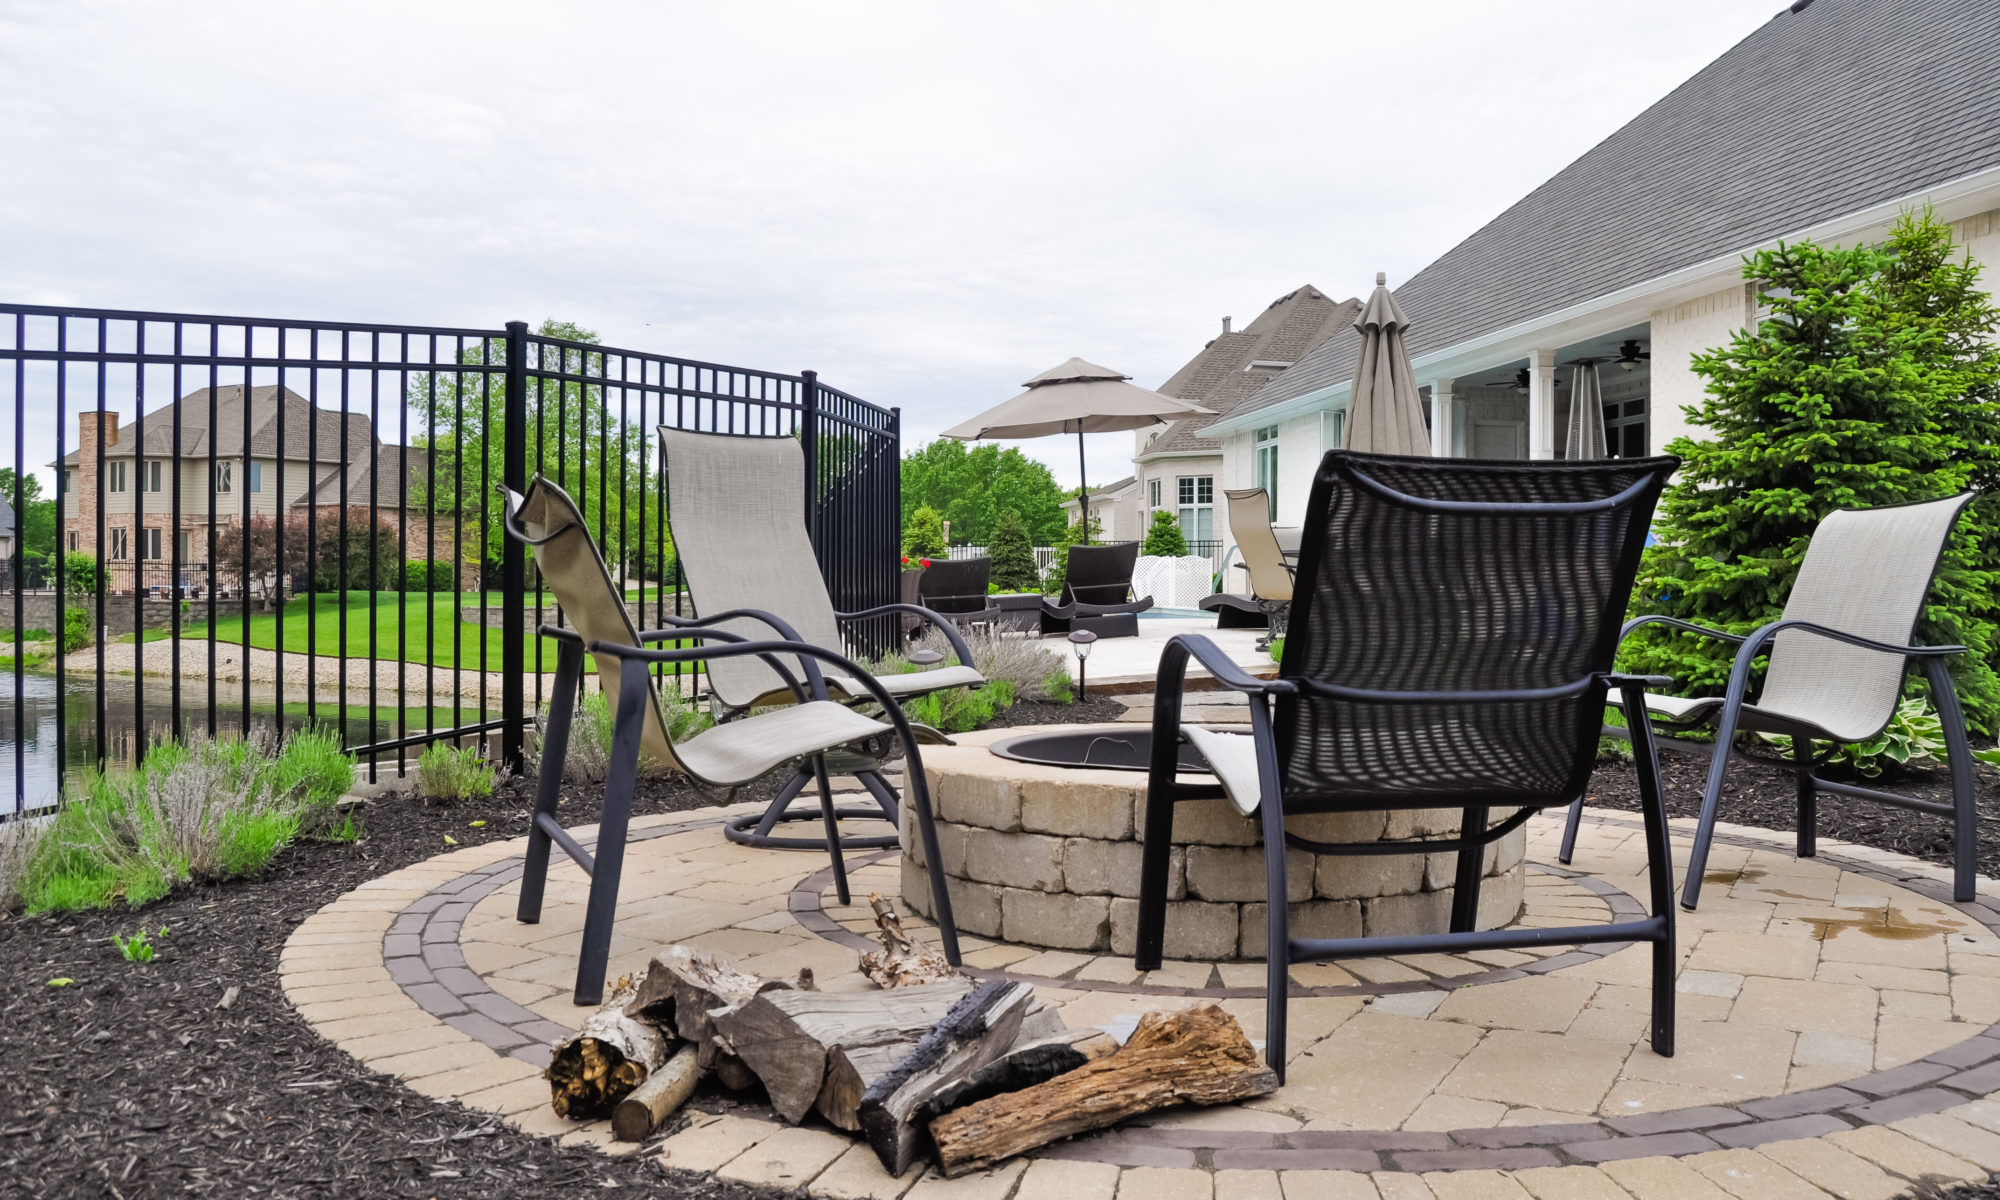 Precision Outdoors Franklin Township Retaining Wall Fire Pit and Patio Travertine paver patio natural cooling slip resistant texture rebuild restoration blocks fire pit space stone walkway perimeter landscaping custom personal privacy pool are a playground pad build mulch installation entertaining Avon indiana